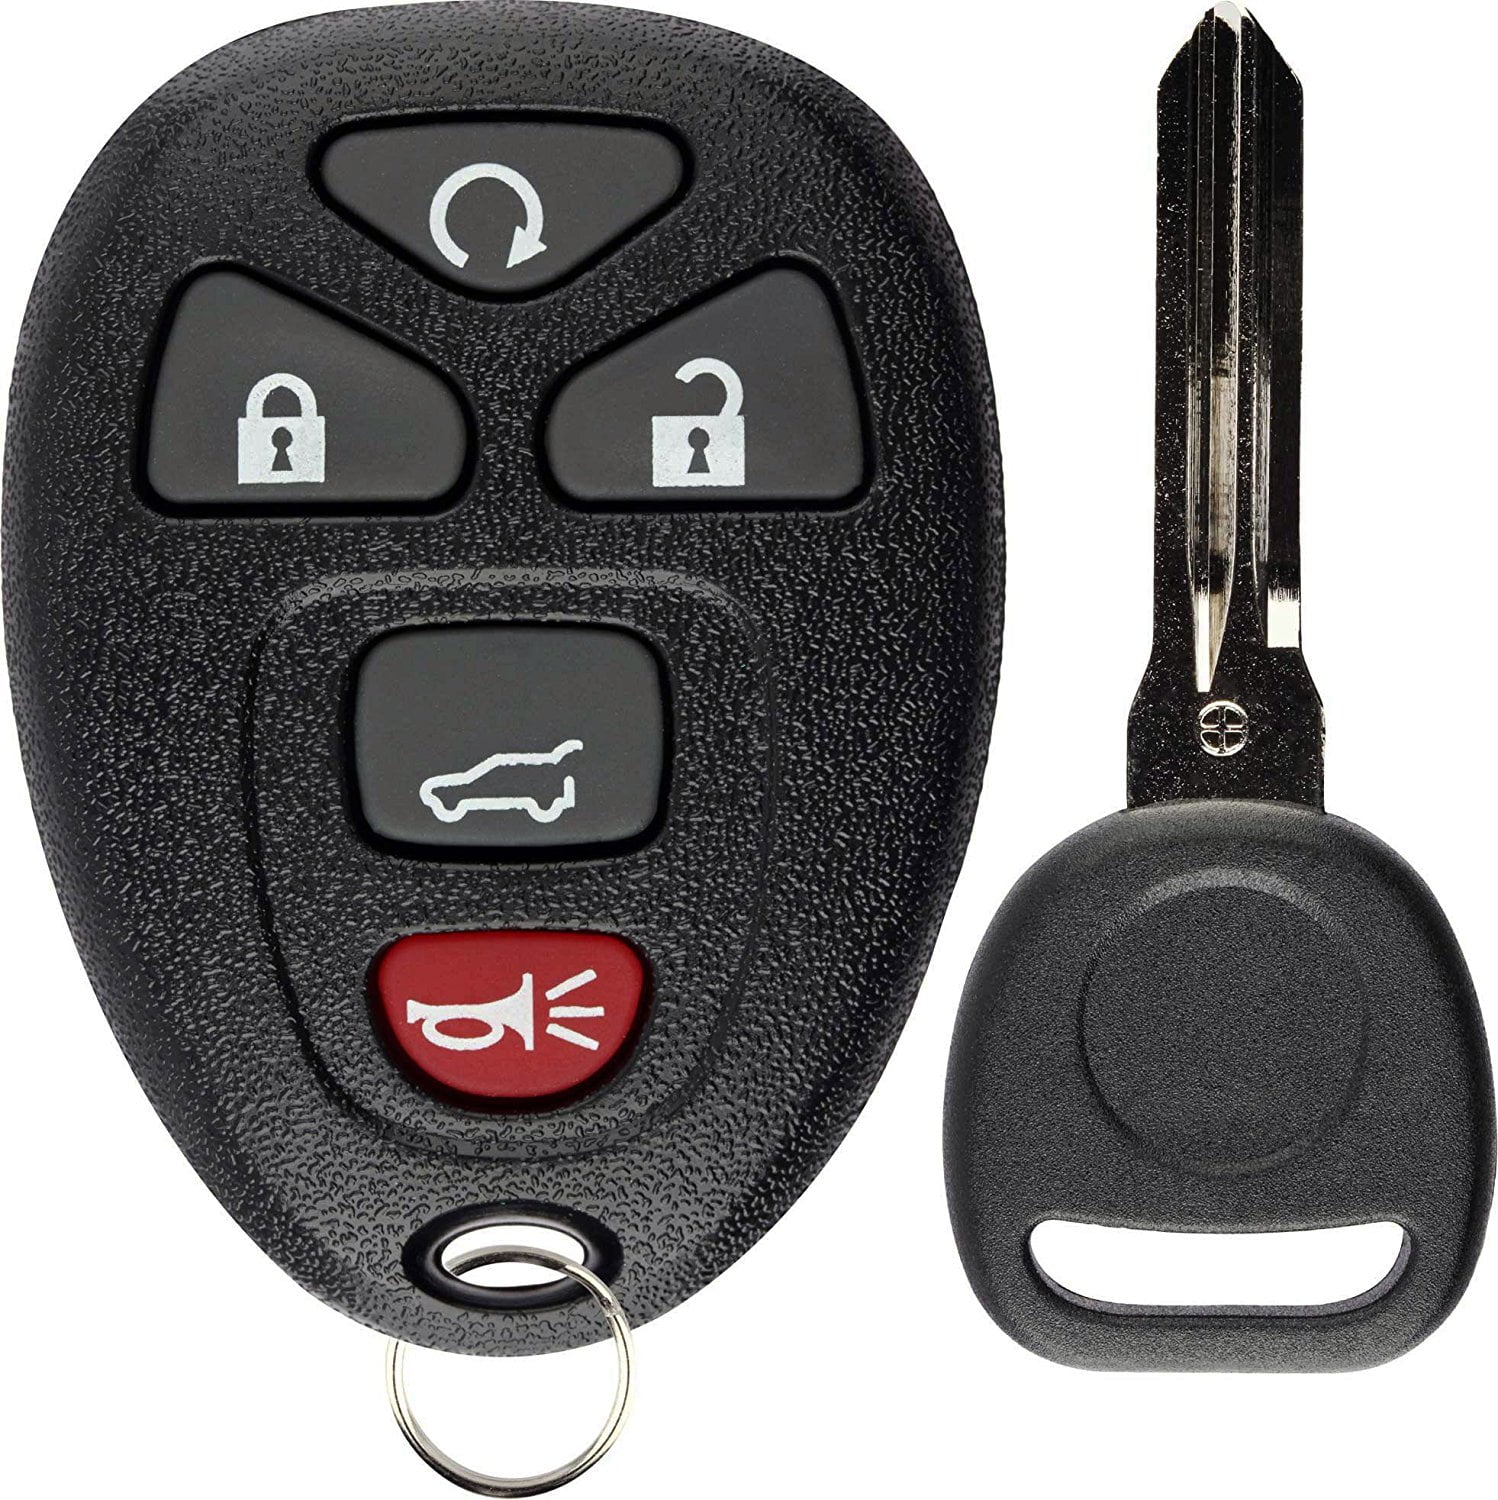 Replacement for Buick Cadillac Chevy GMC Entry Keyless Remote Car Key Fob 4b